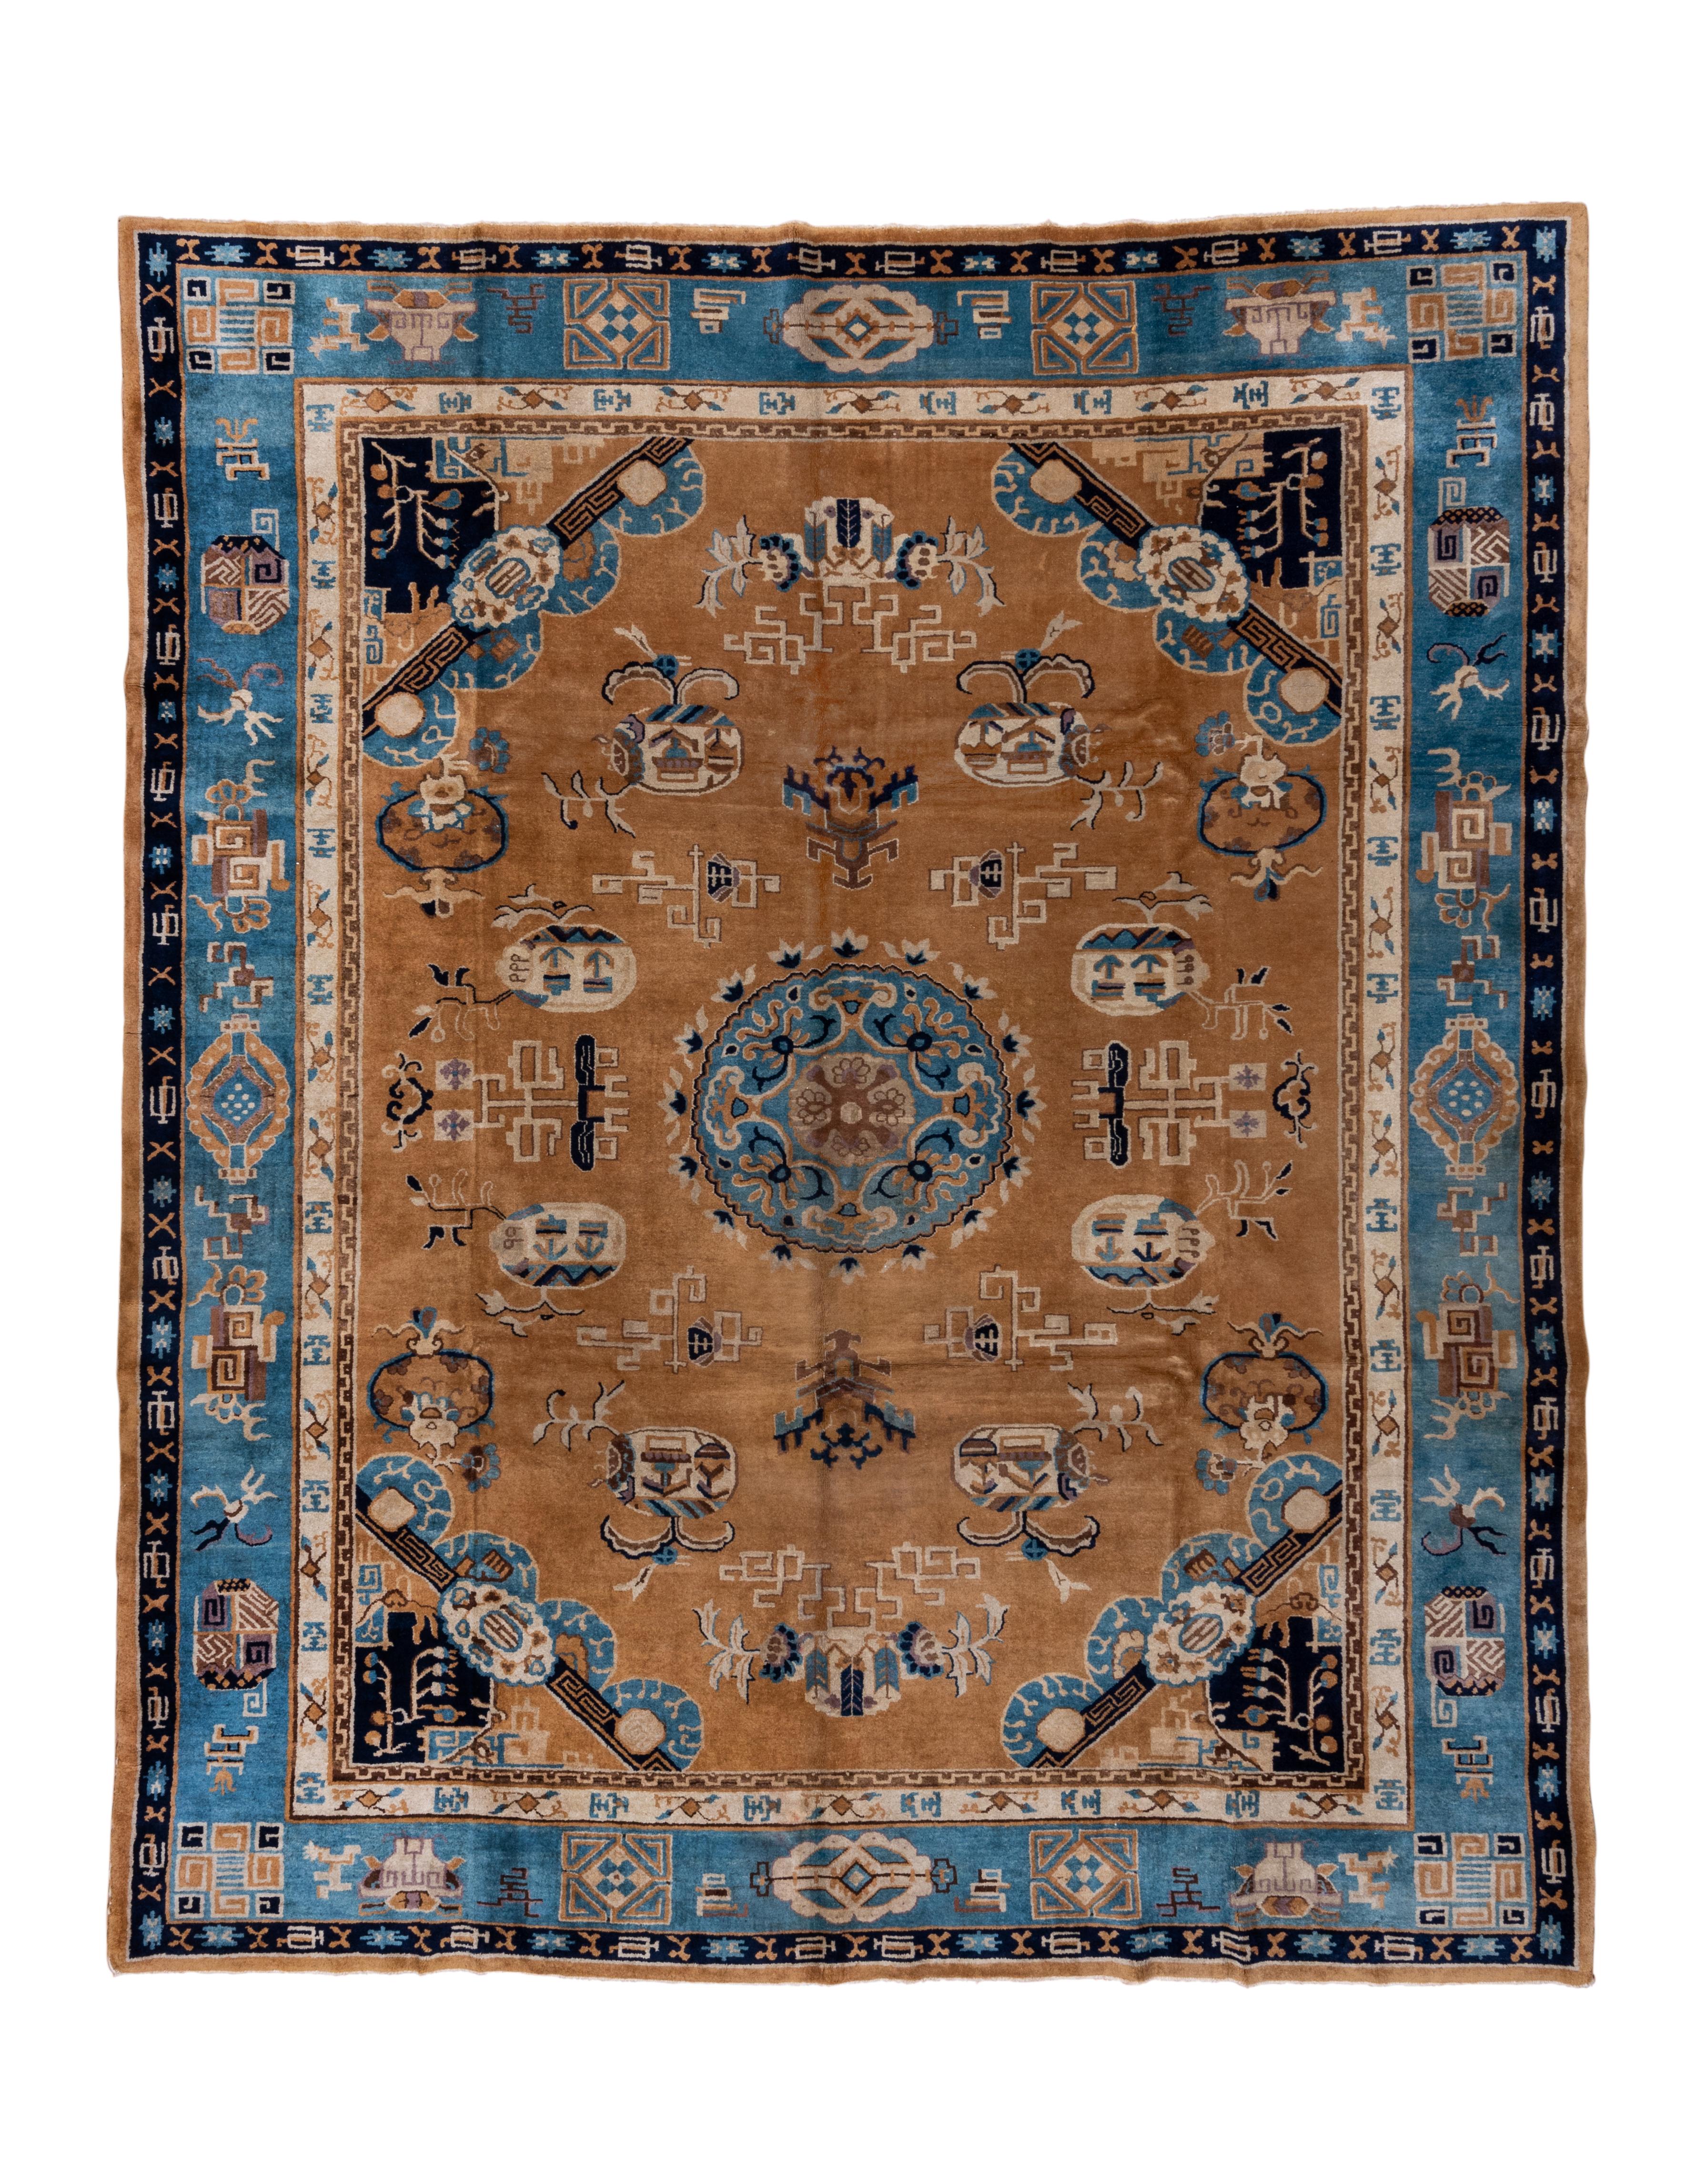 This is a totally wild carpet, from the rust field, through the scalloped light blue medallion with a central even arm cruciform, to the diagonally barred corners with little blue arches, to the light blue border  with its vessels, fretwork bits and